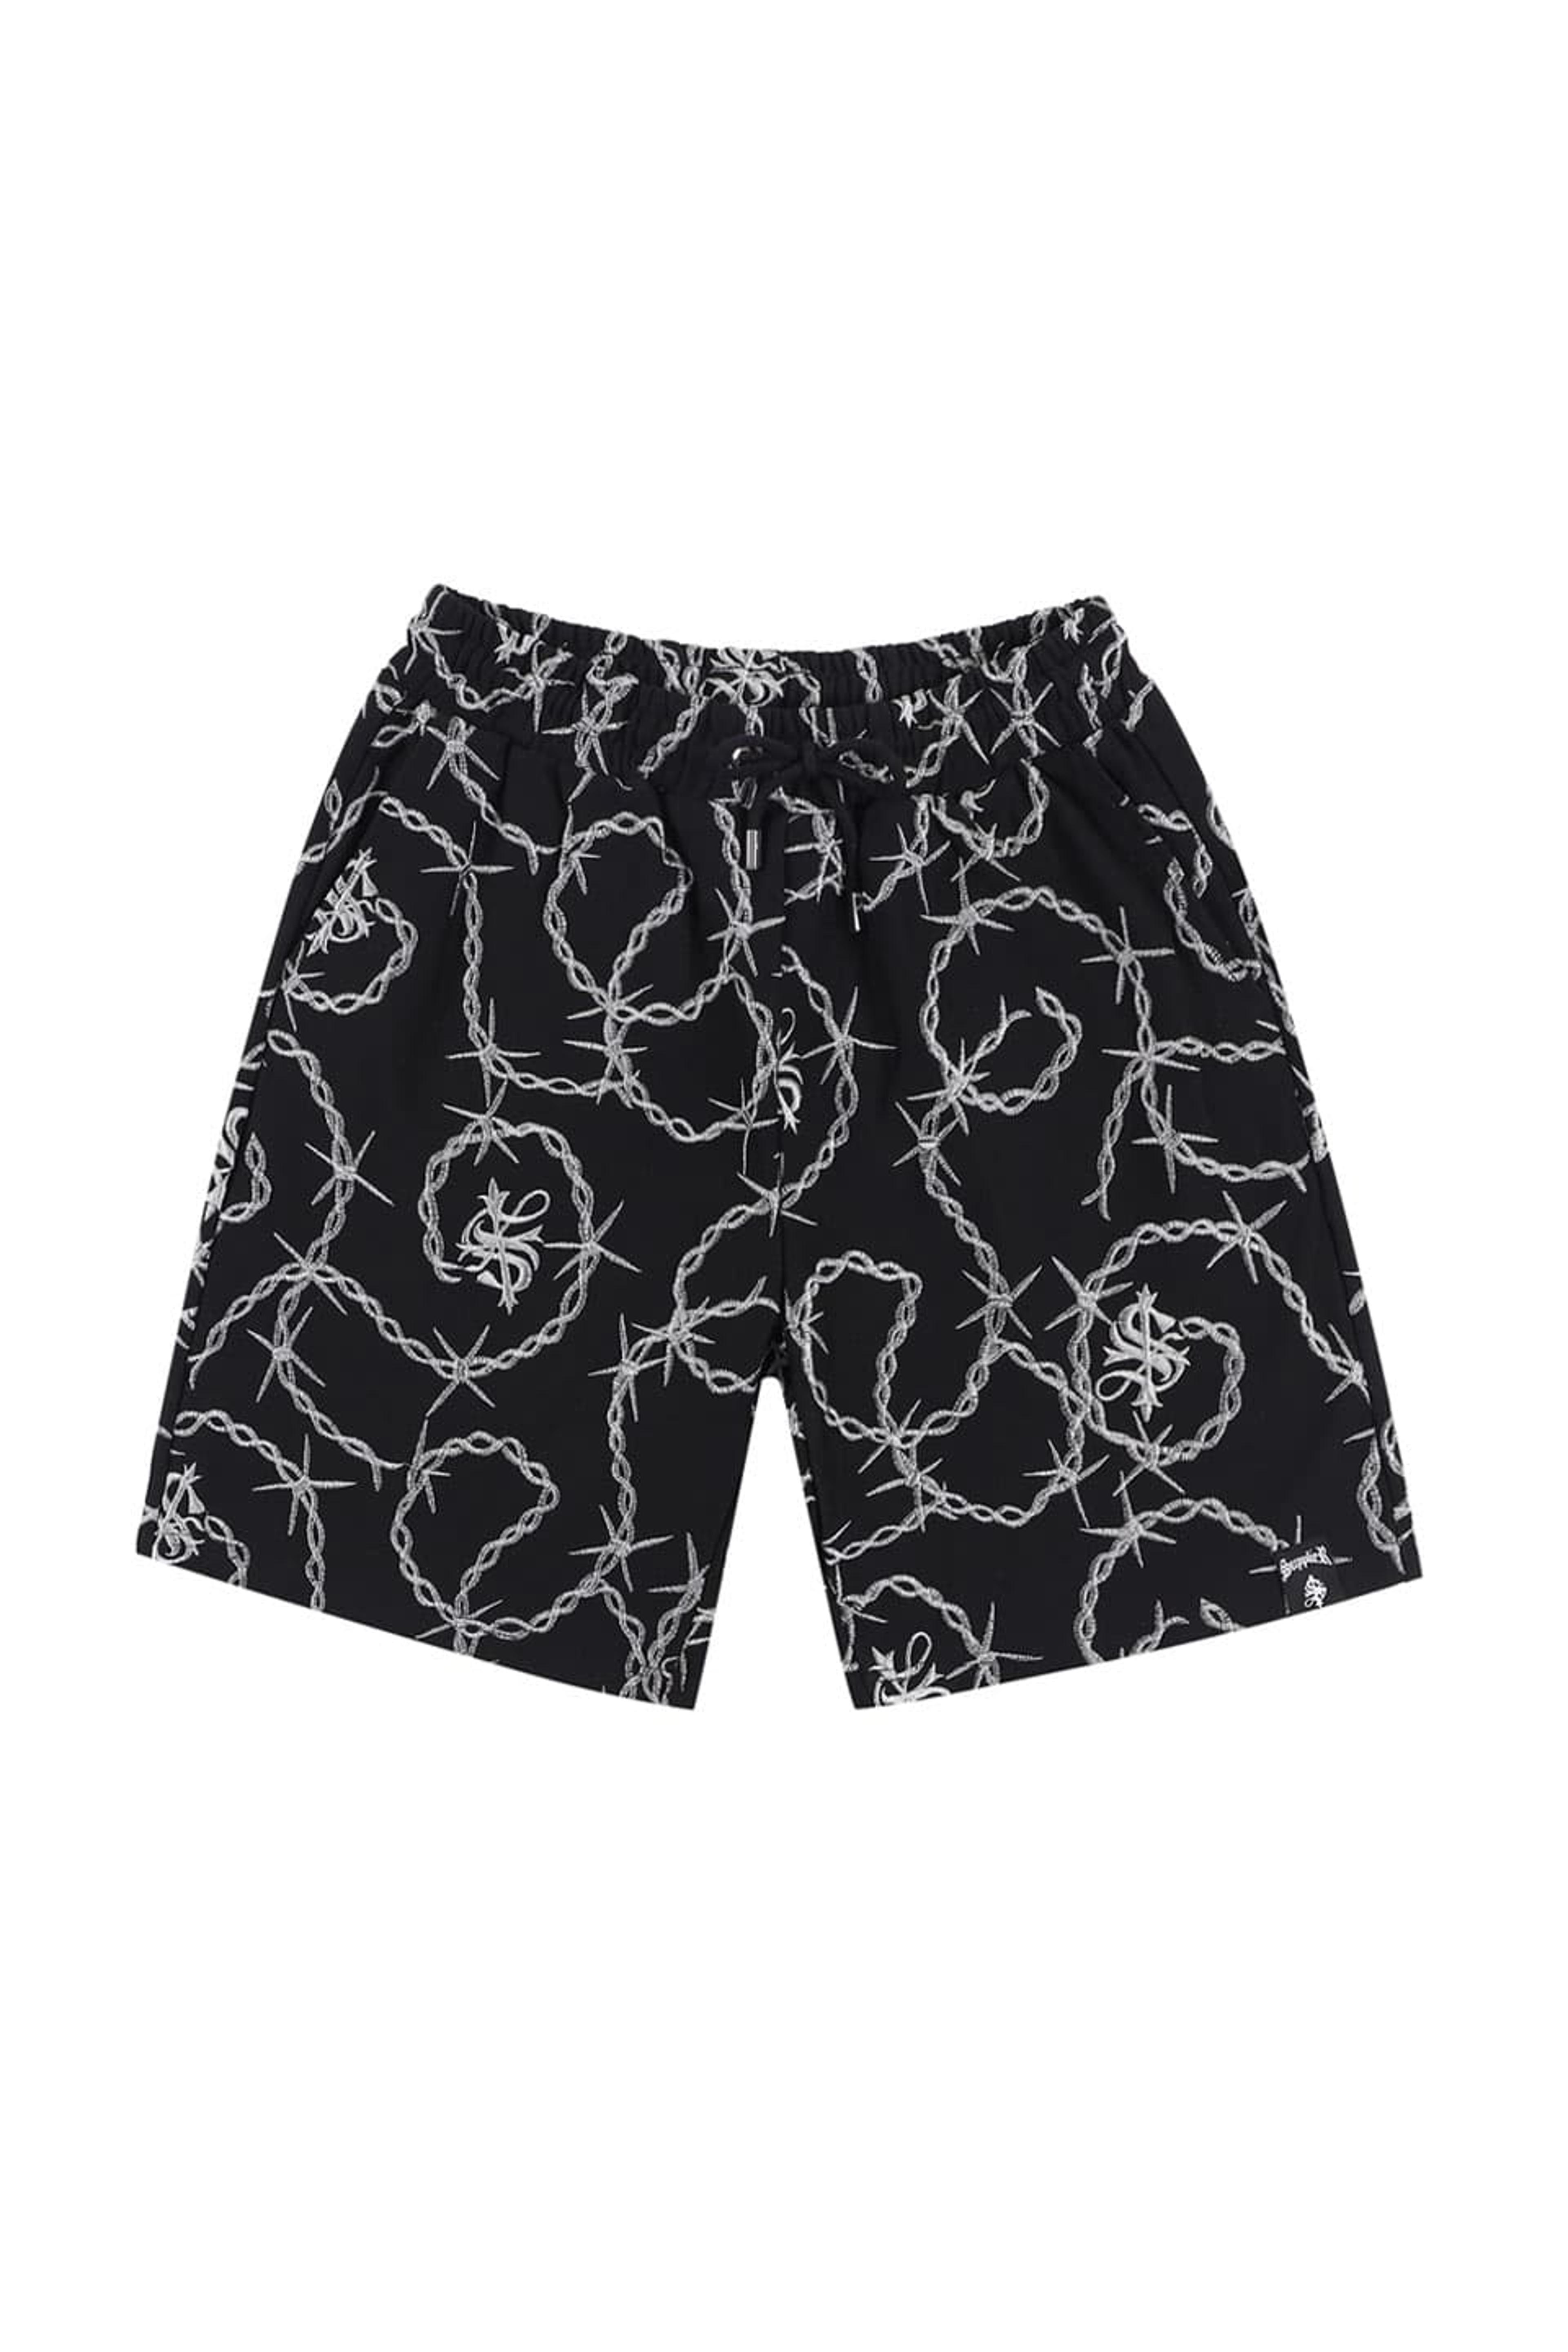 Alternate View 9 of Cross Chain Embroidery Shorts